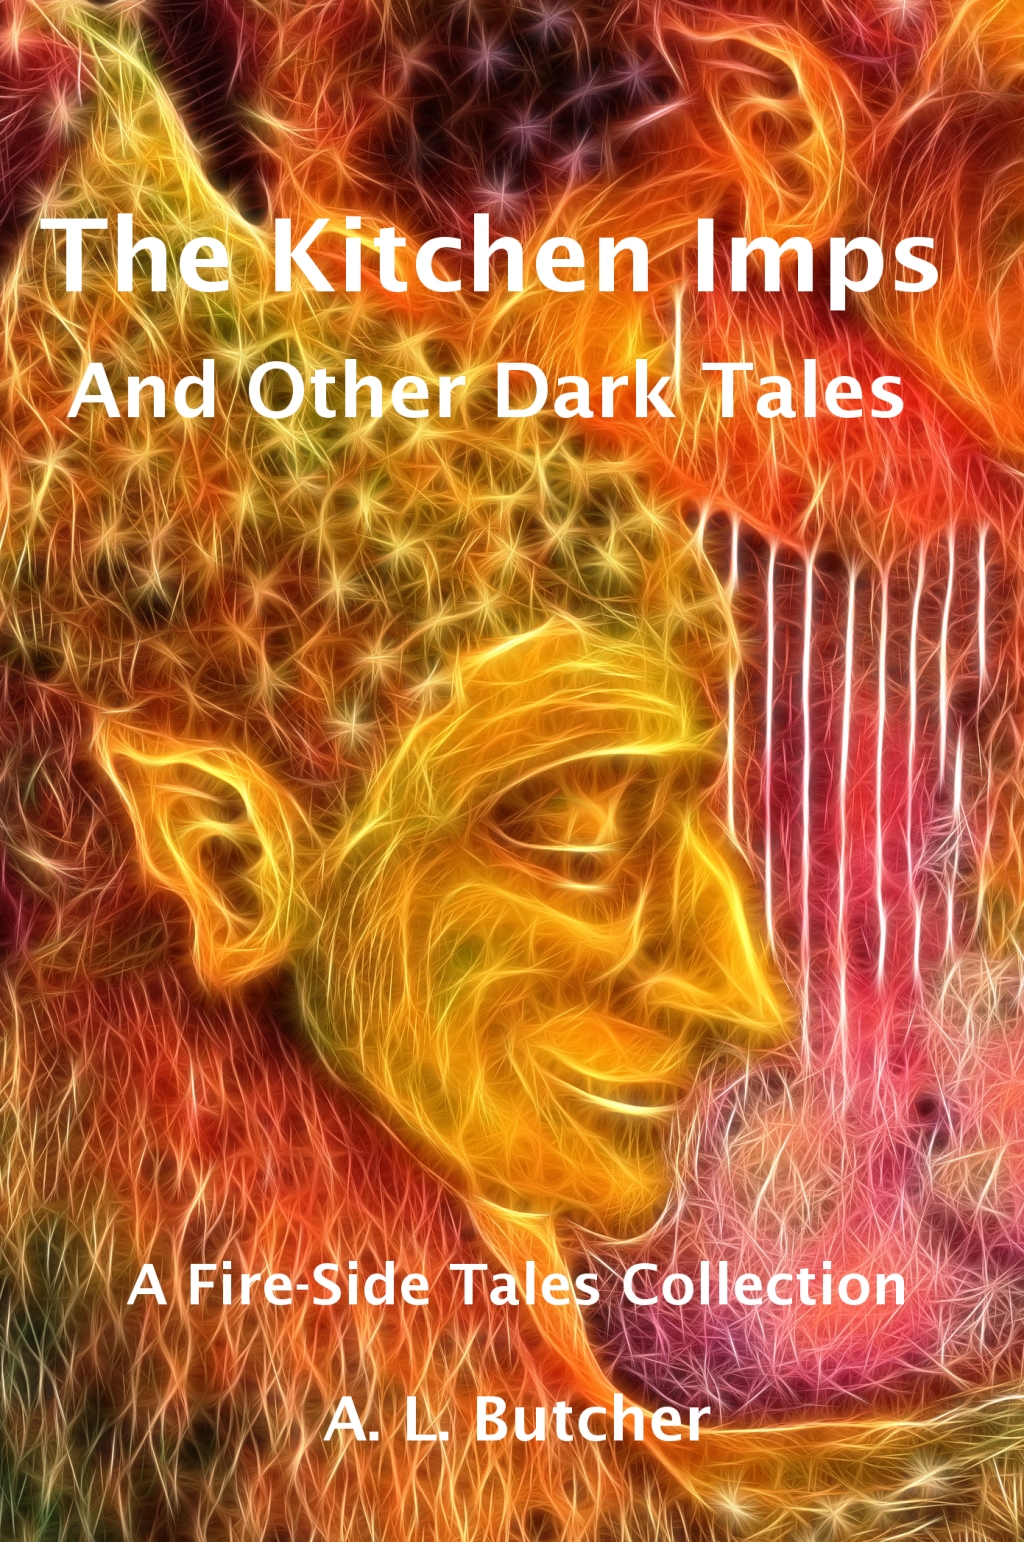 A.L. Butcher, Author of The Kitchen Imps and Other Dark Tales